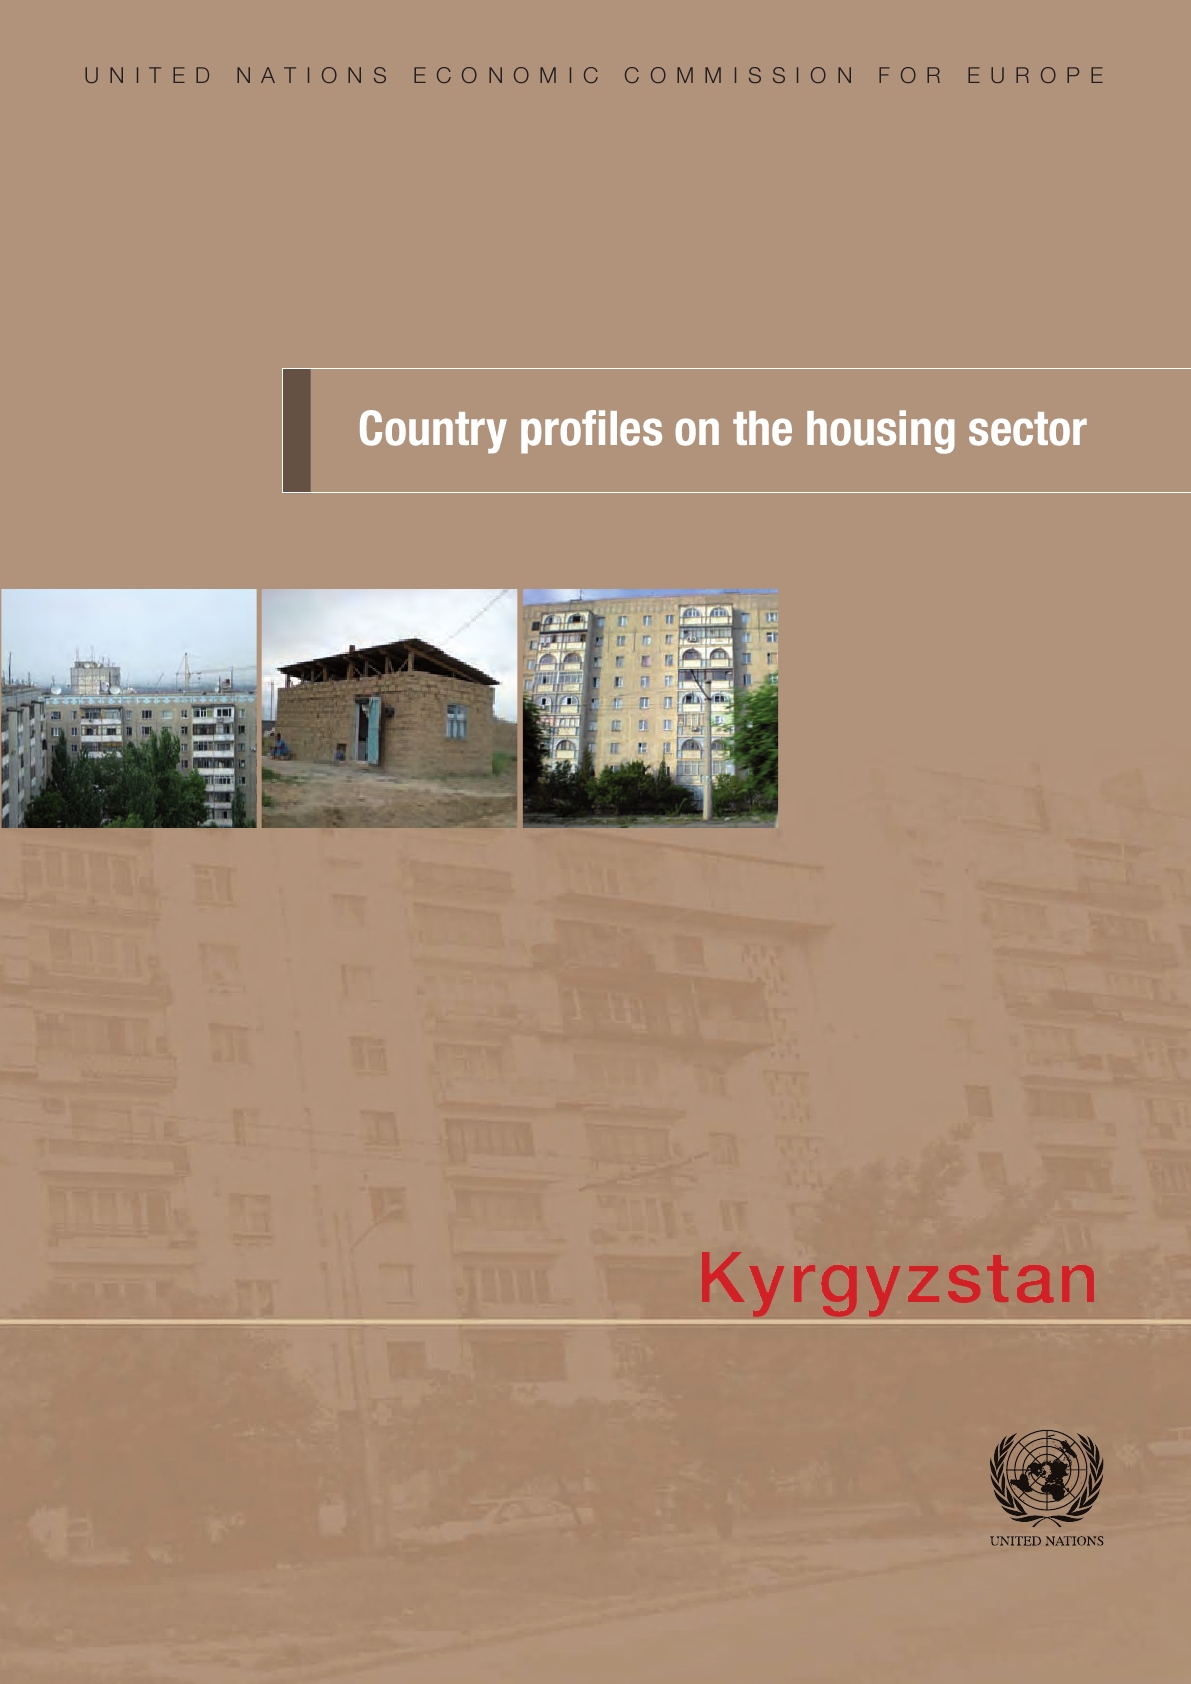 This country profile on the housing sector of Kyrgyzstan is the thirteenth in the series published by the Committee on Housing and Land Management. The study not only provides in-depth analysis and policy recommendations, but also focuses on specific challenges or achievements within the housing sector that are of particular concern to Kyrgyzstan. These issues are housing maintenance and management, land administration and spatial planning, and decentralization.